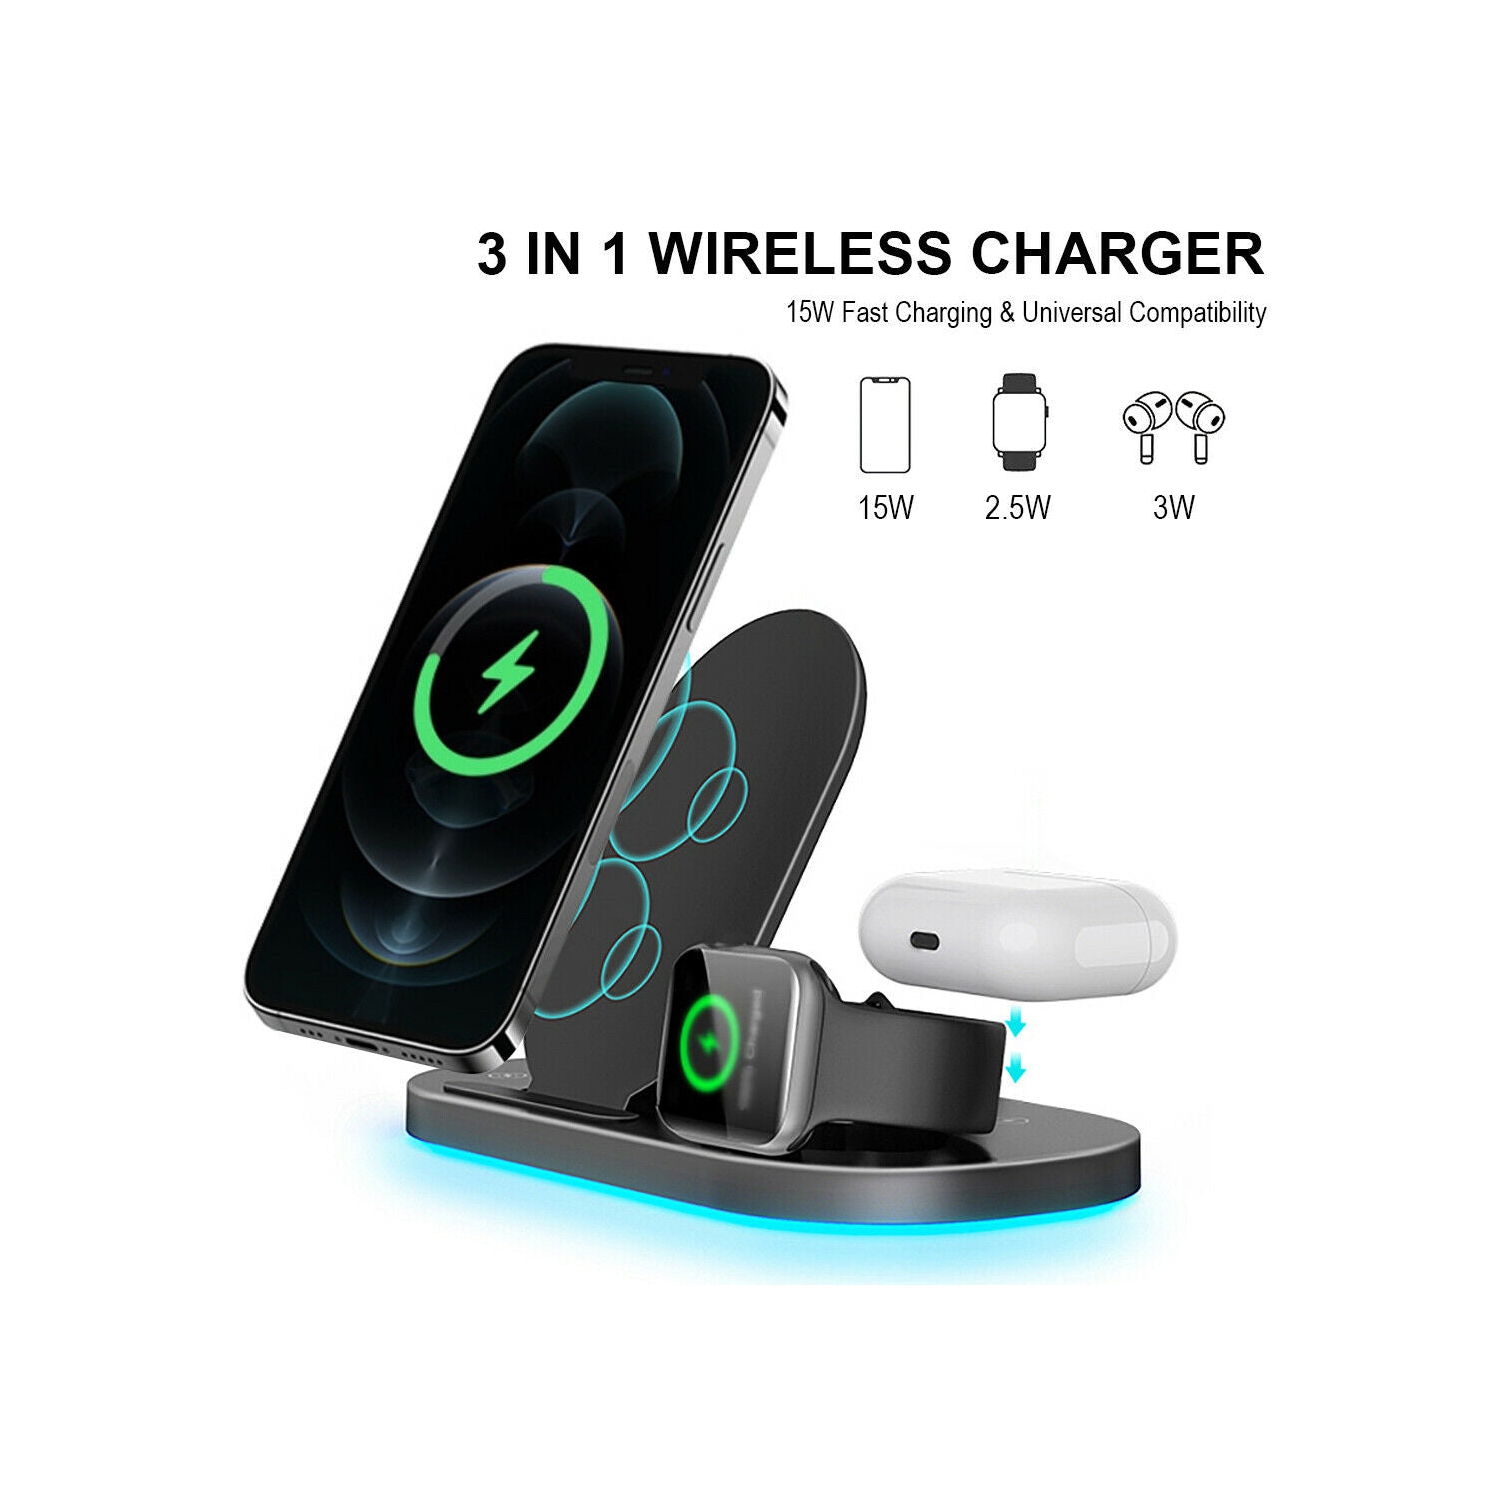 3 IN 1 Wireless Charging Station Qi 15W for iPhone 12/11/Xs/XR/8,iWatch SE/6/5/4